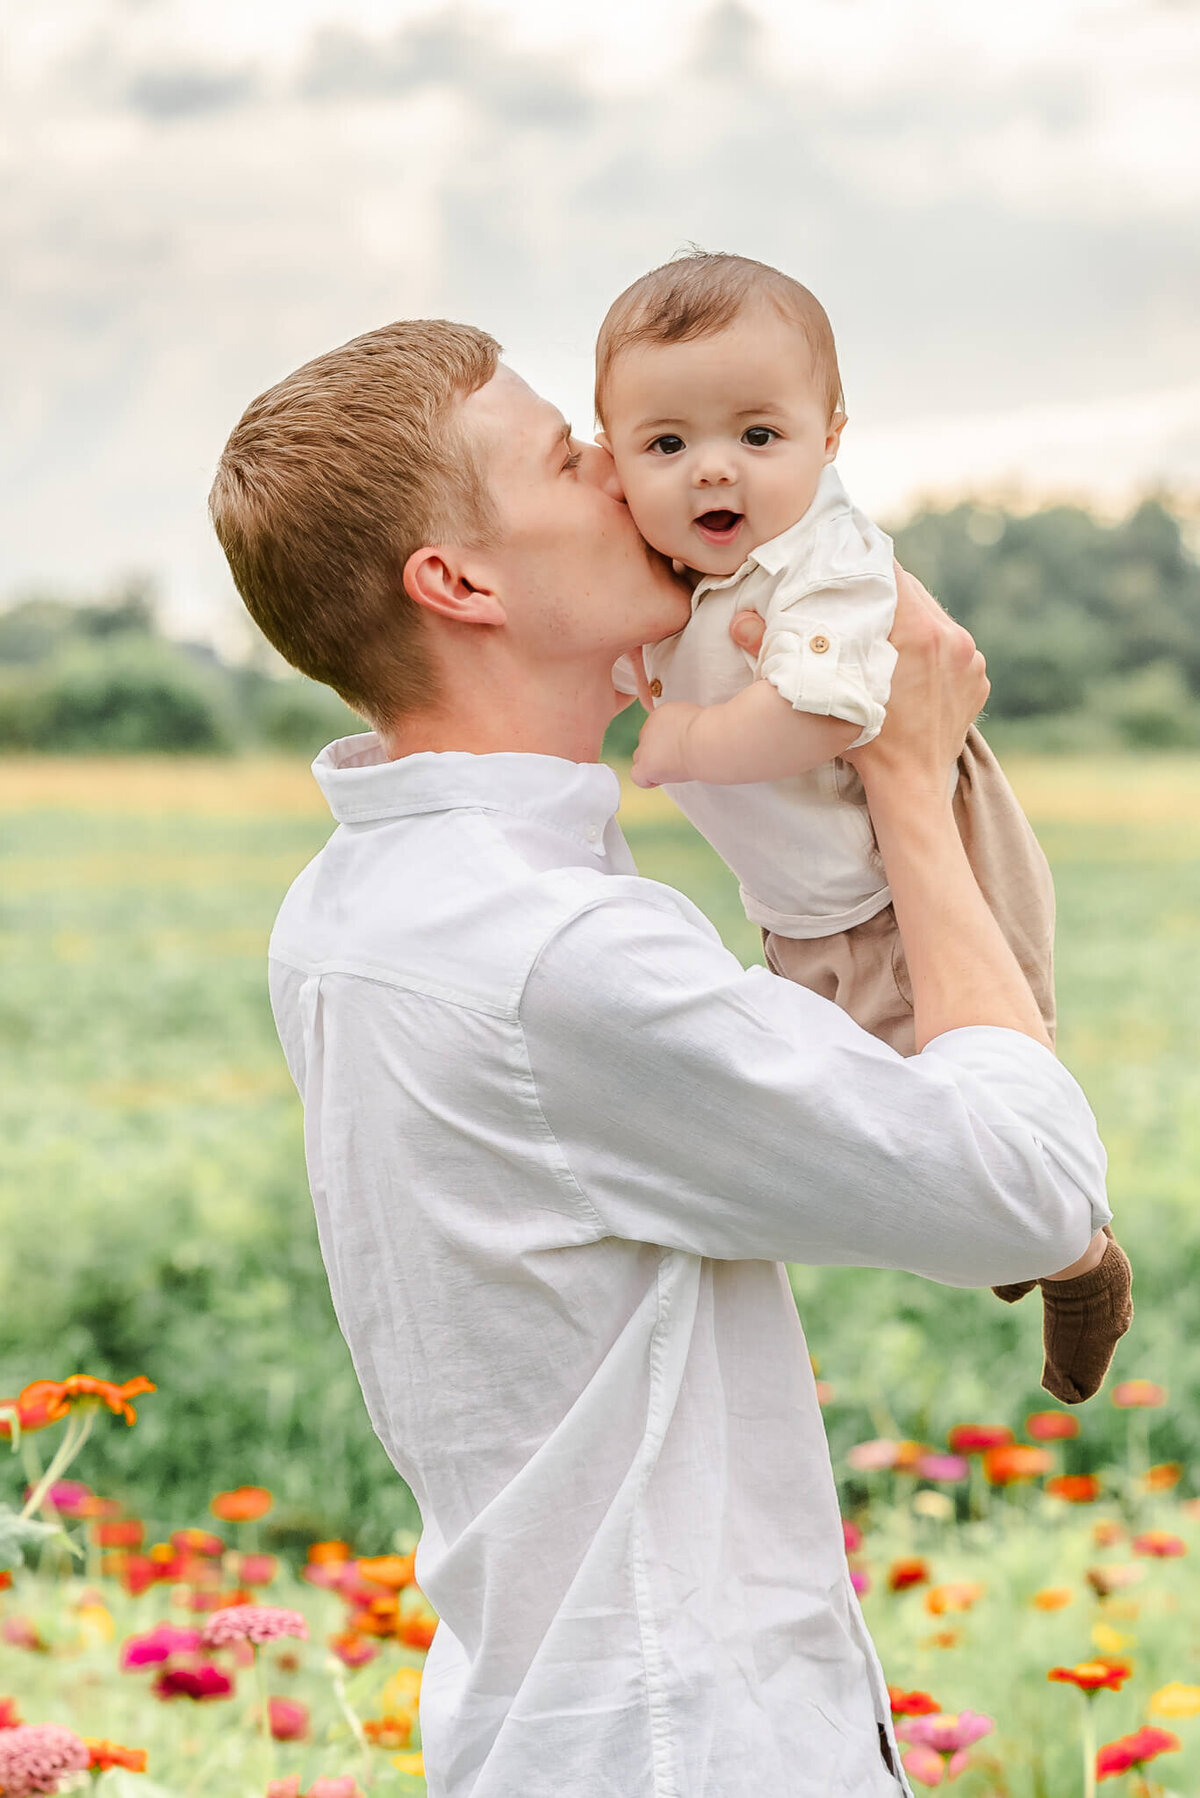 A man wearing a white shirt holds up his infant son and gives him a kiss on the cheek. Image by Justine Renee Photography in Moyock, North Carolina.